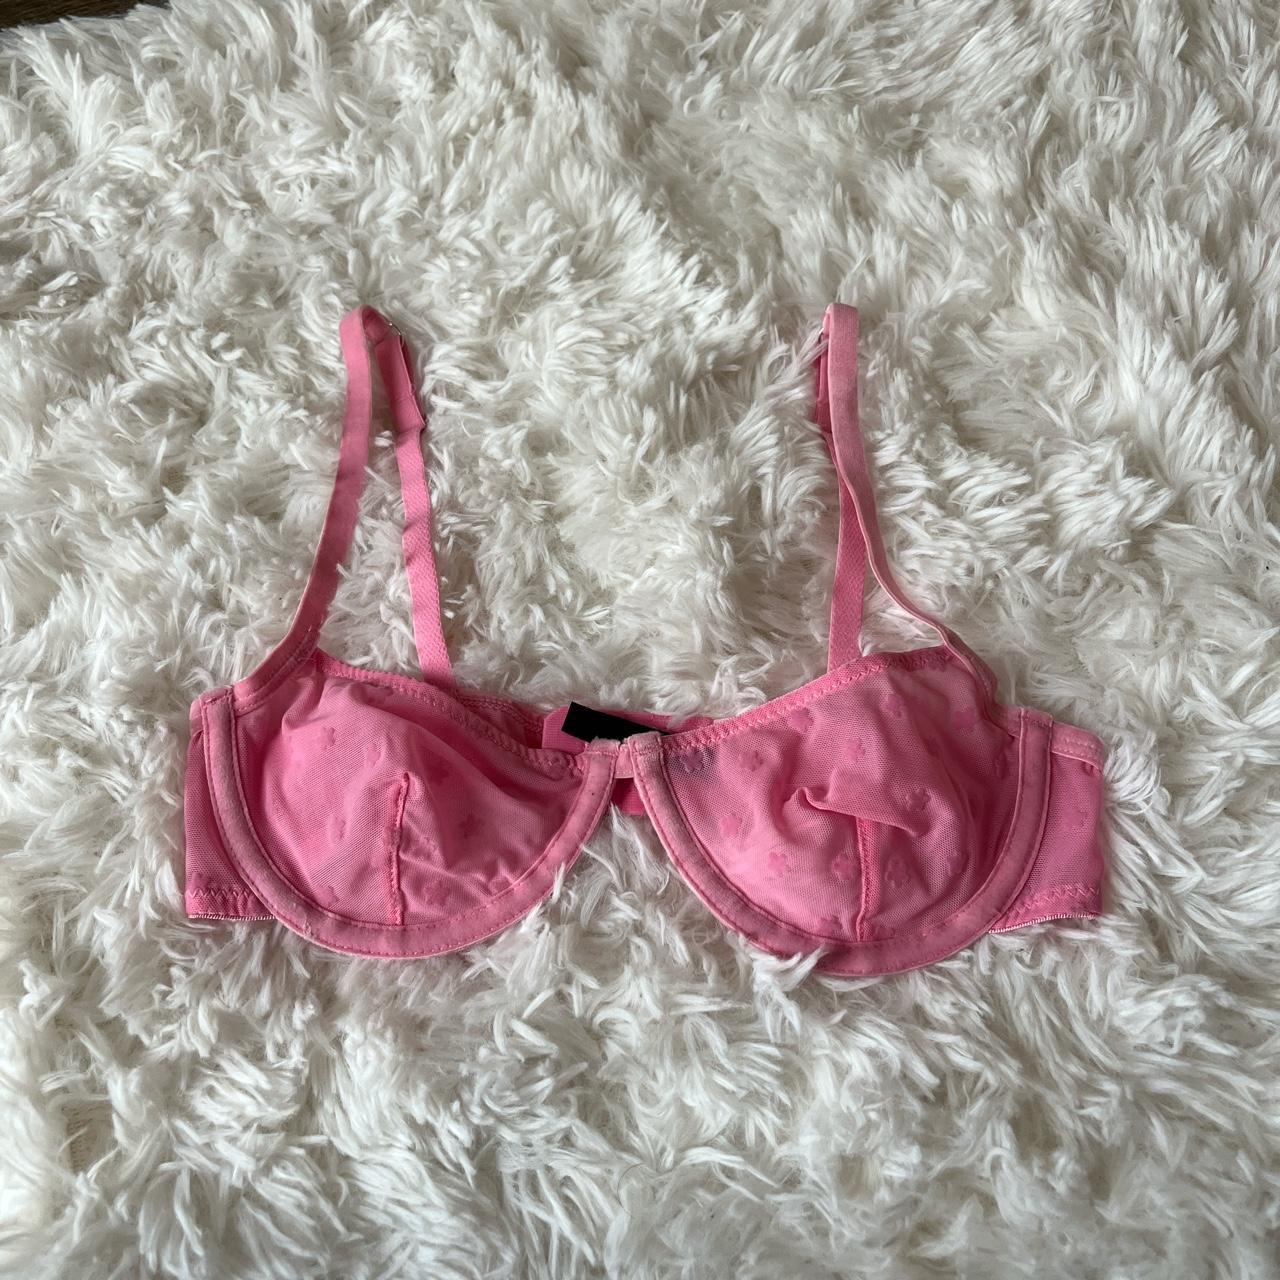 Rosie bra from Playful Promises Quarter-cup Great - Depop